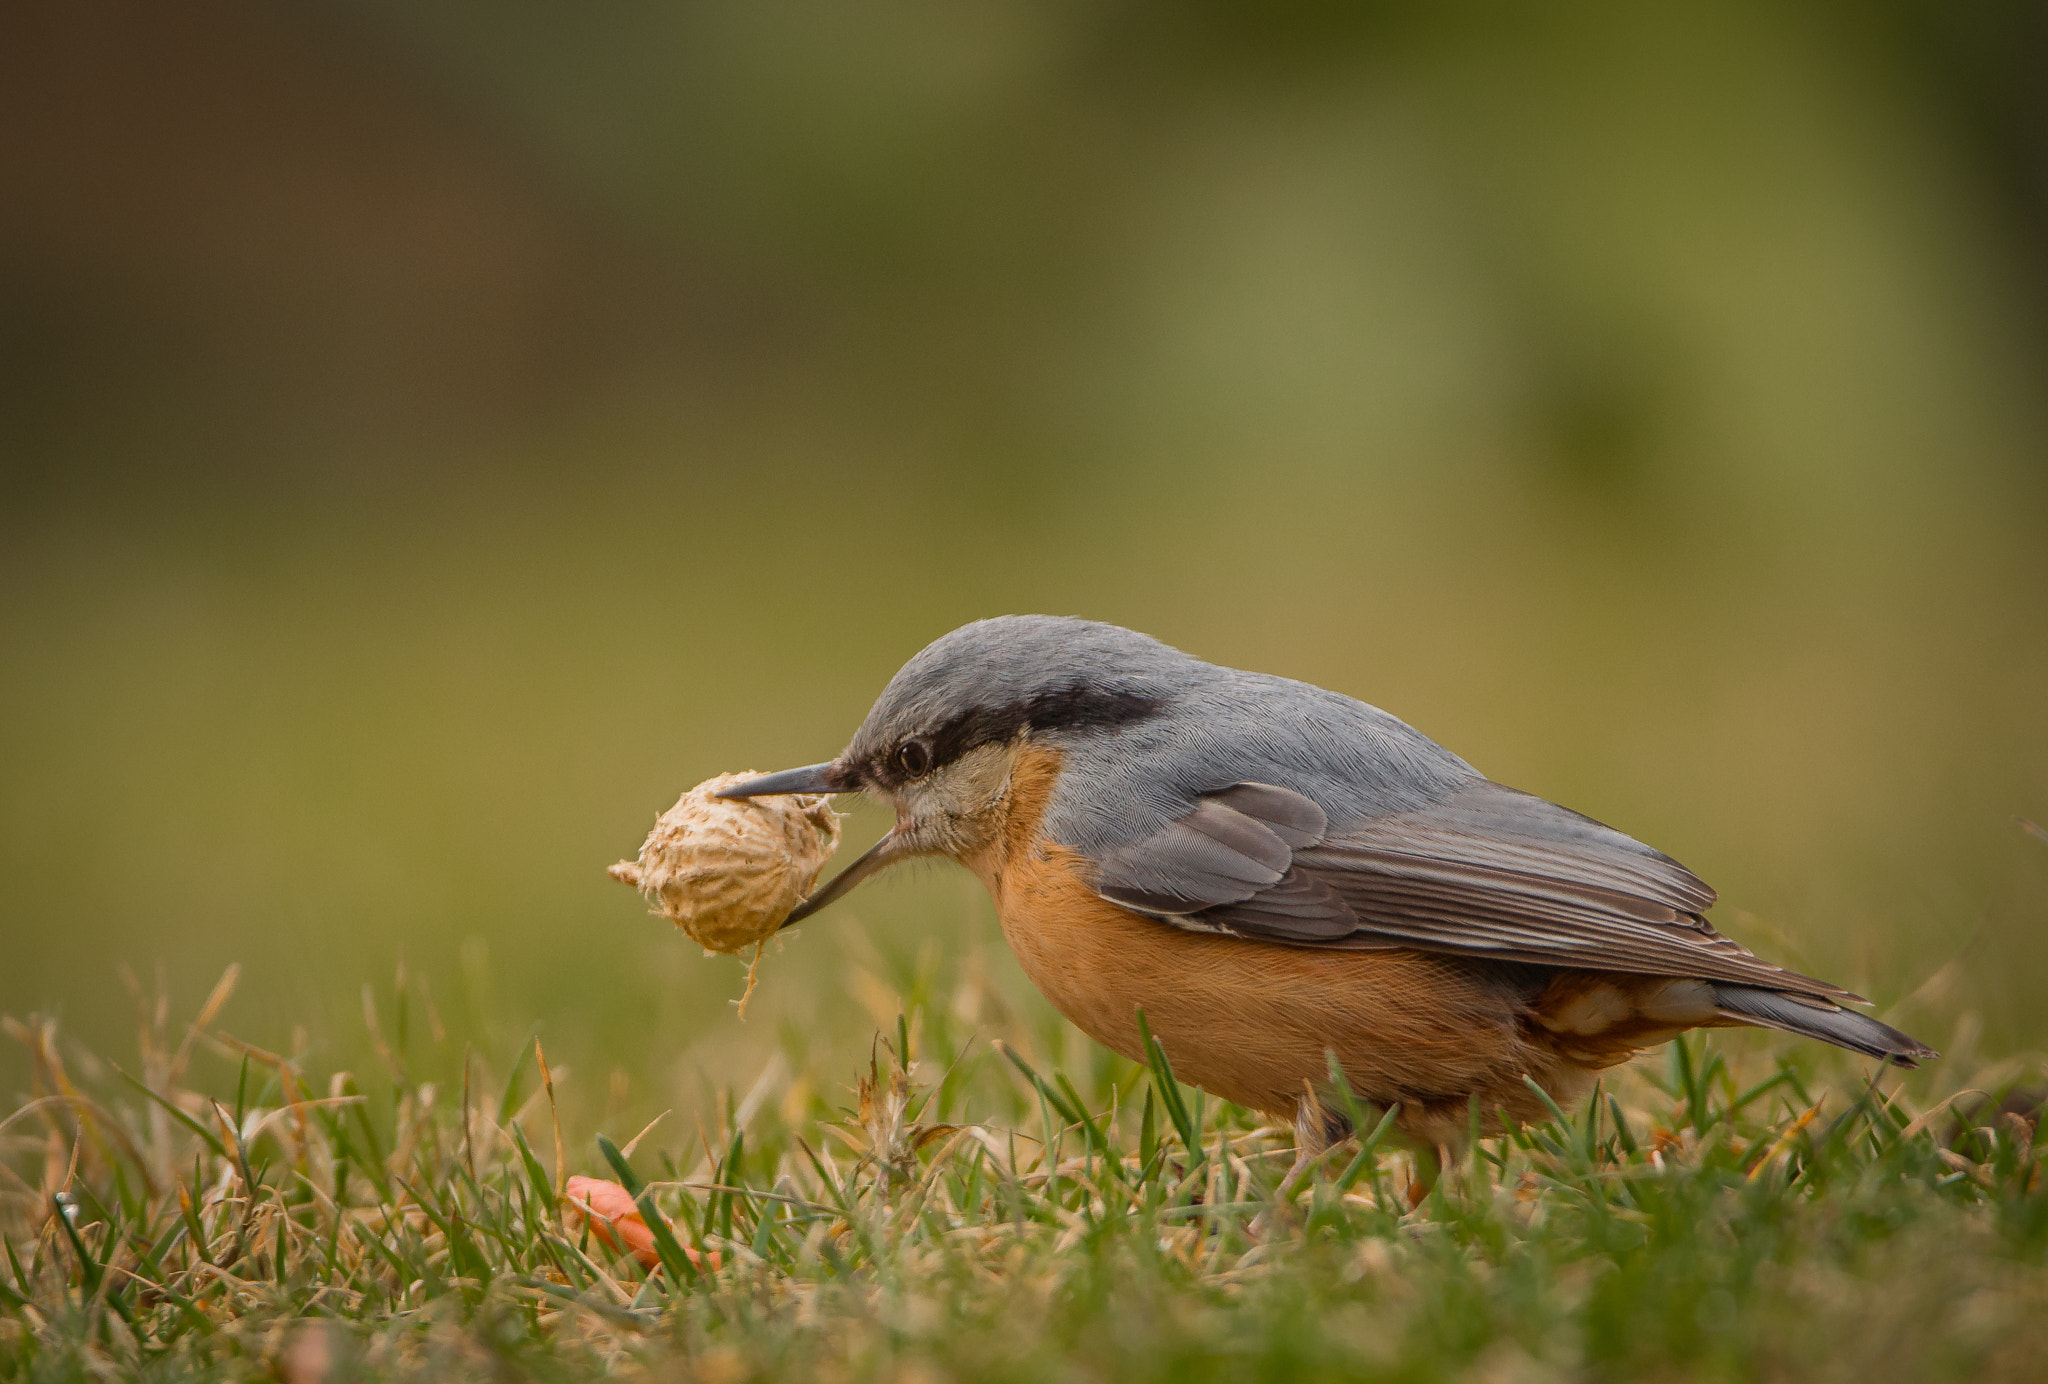 Nikon D5100 + Sigma 150-600mm F5-6.3 DG OS HSM | C sample photo. Little guy with great hunger photography